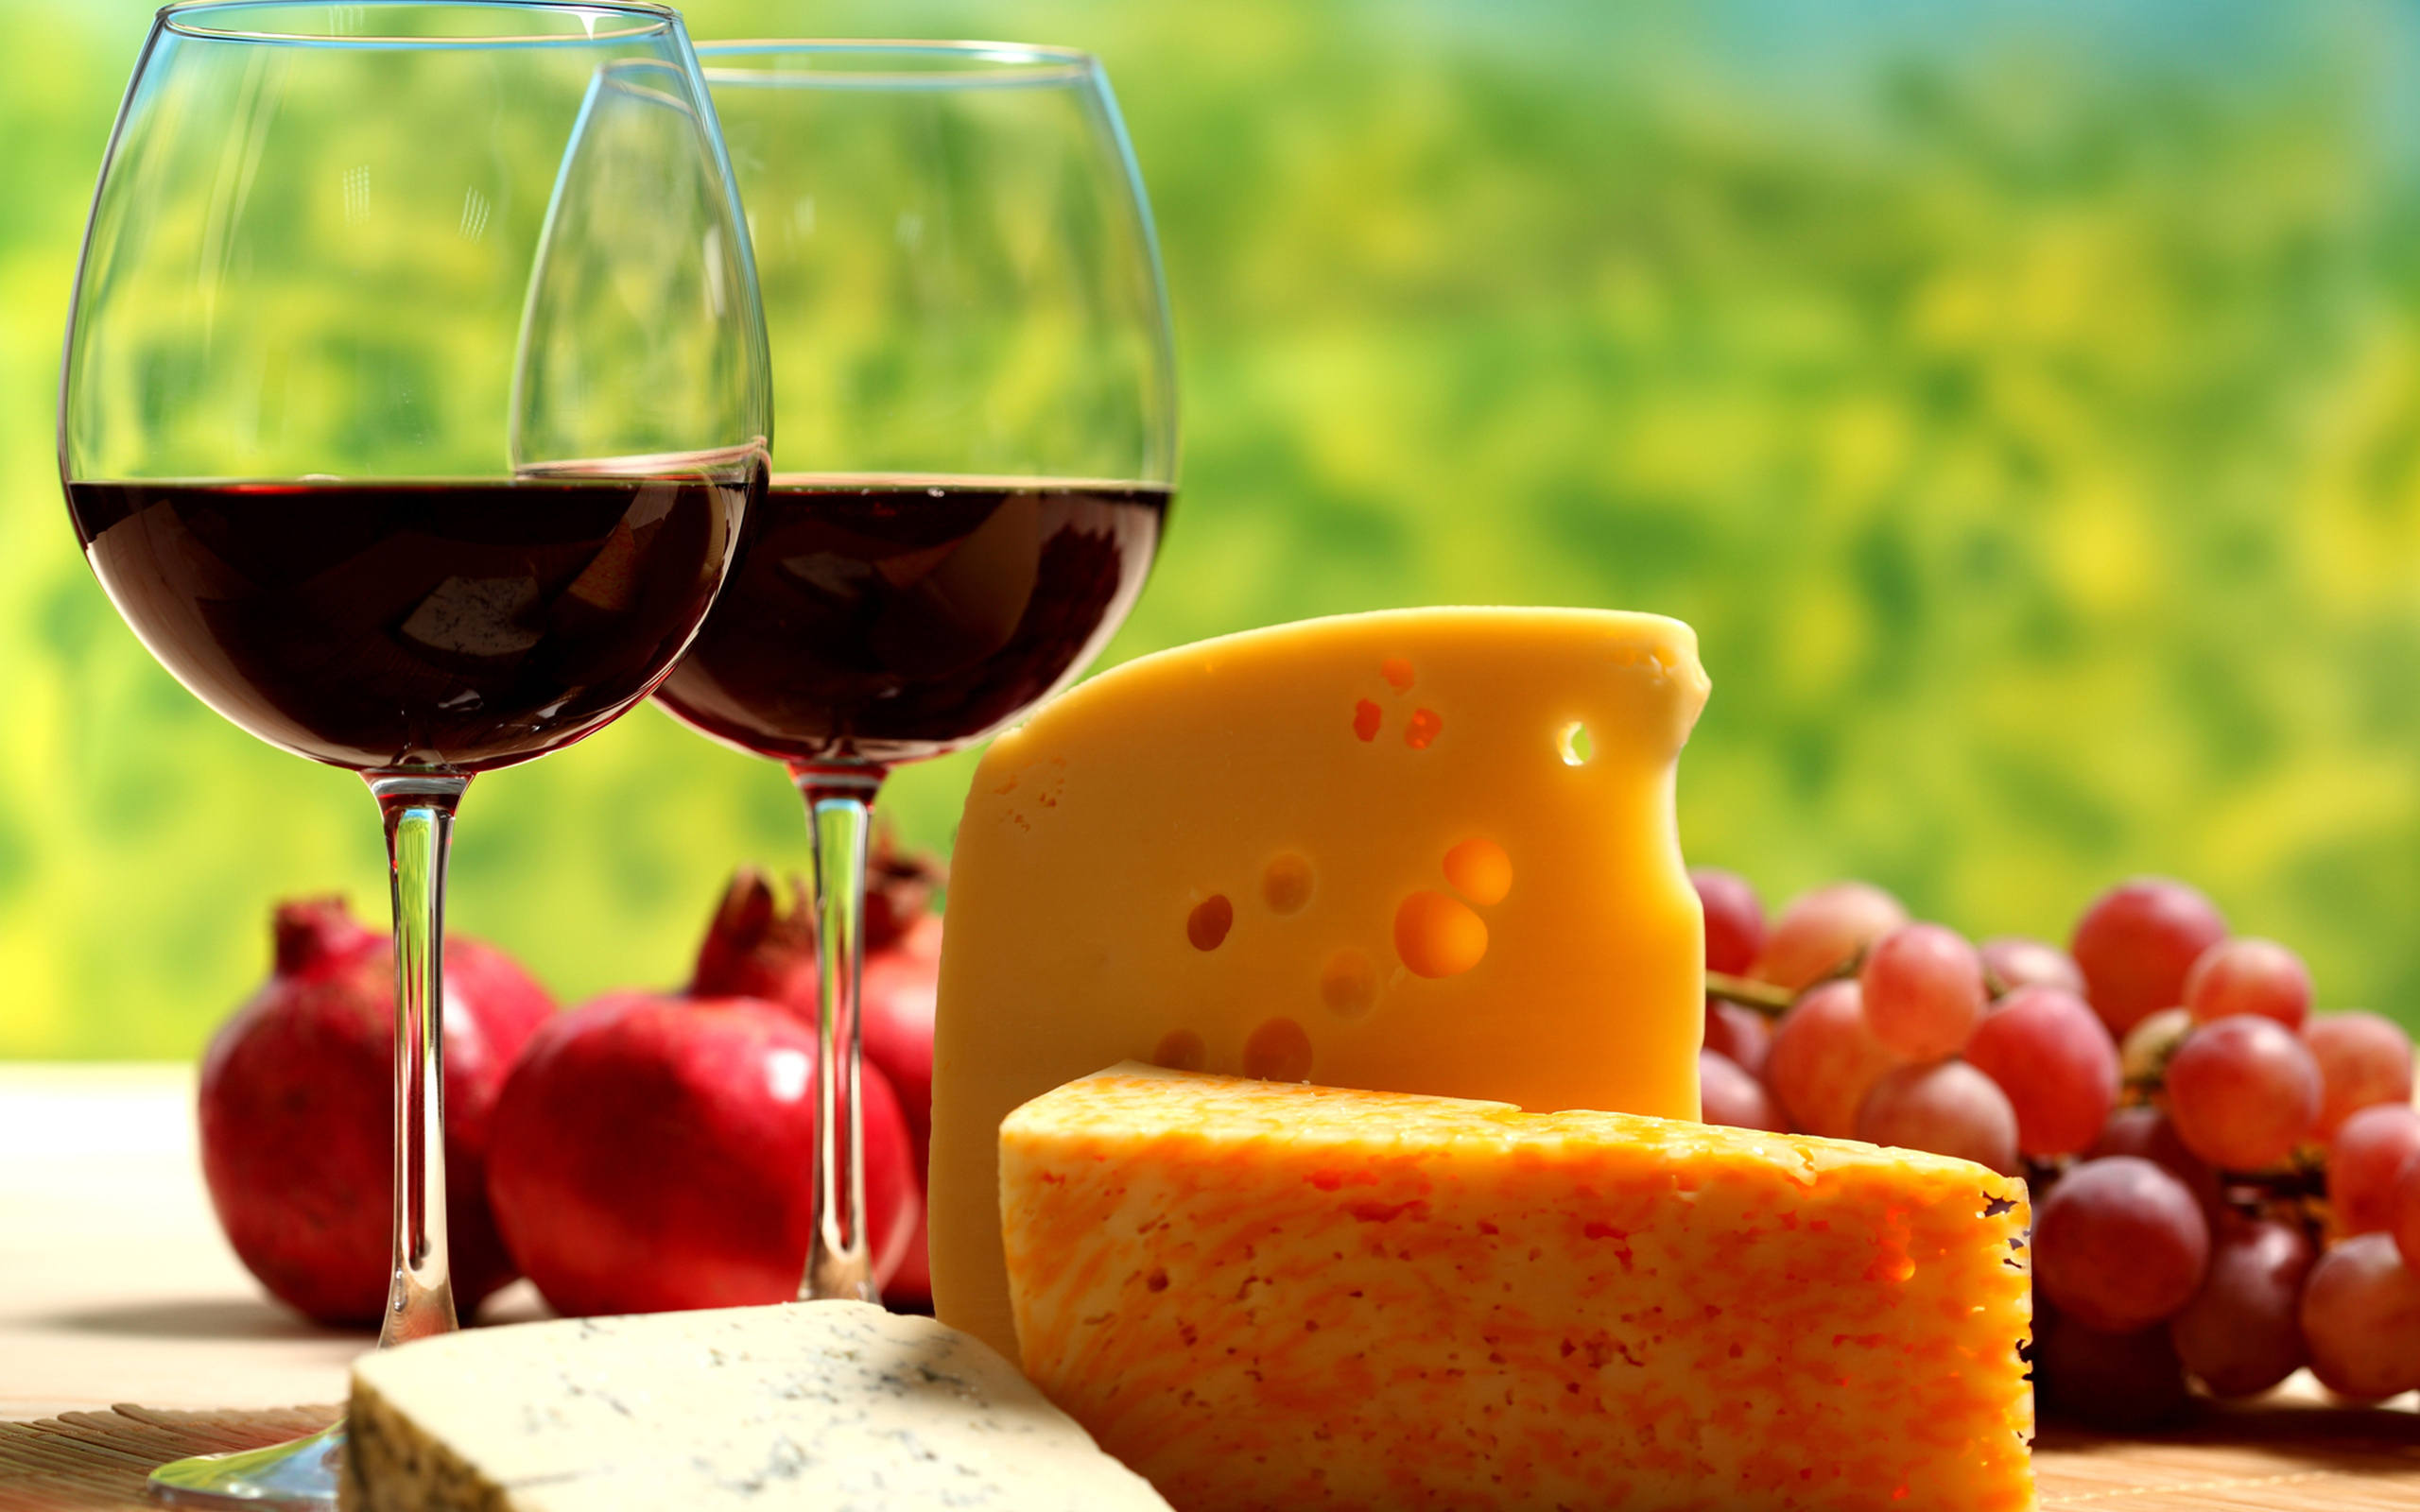 fipa_soiree_wine_cheese_france_loterie_cadeau_pincrest_featured.jpg